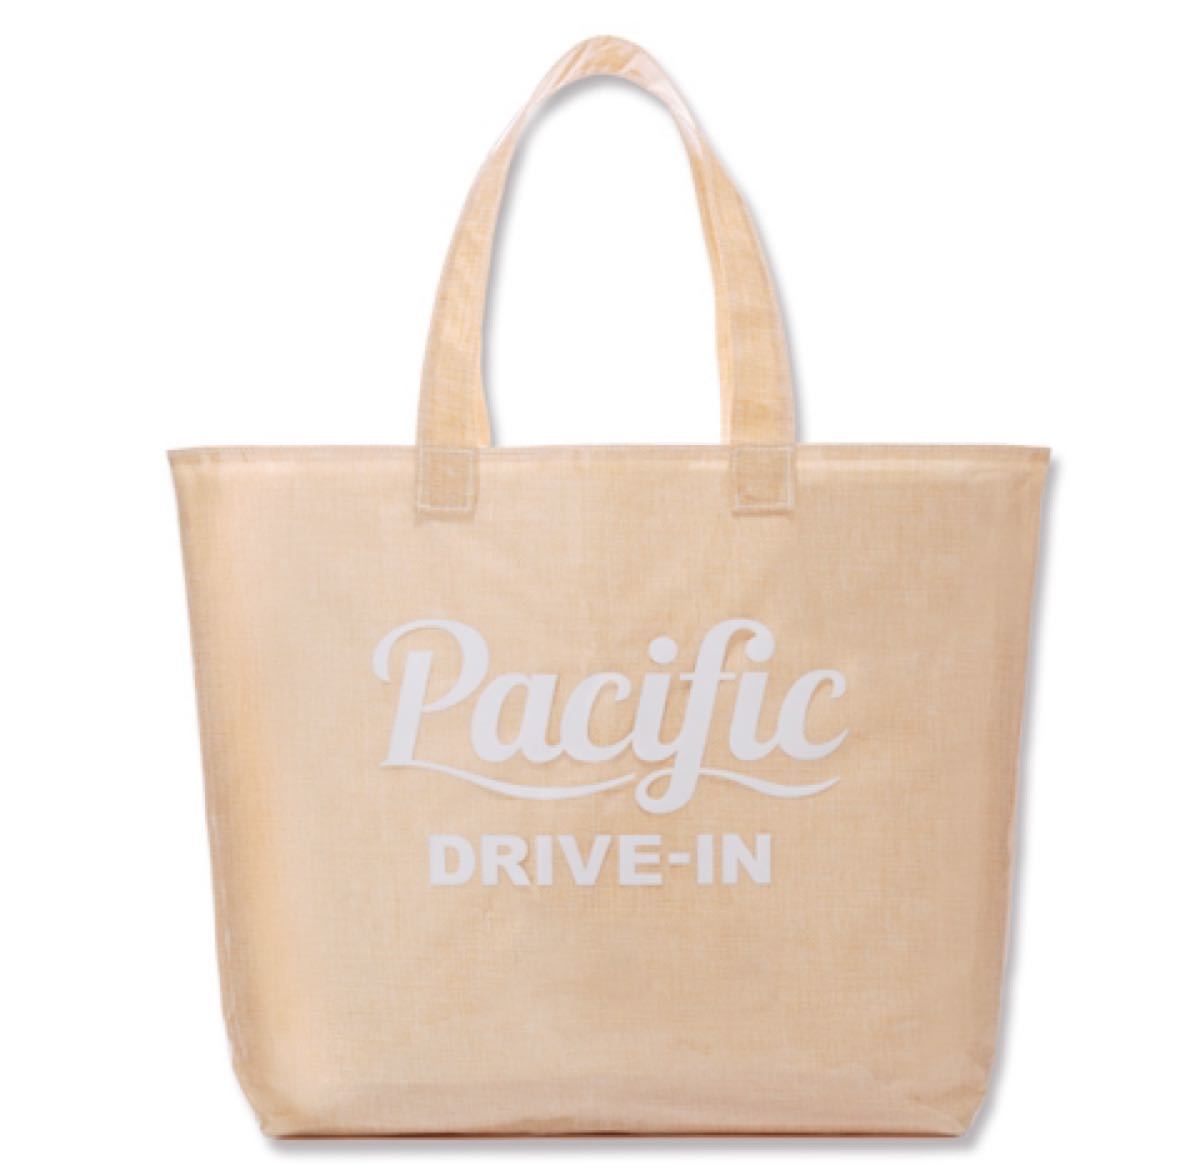 Pacific DRIVE-IN　クリアサマーバッグ 男女兼用　新品未使用